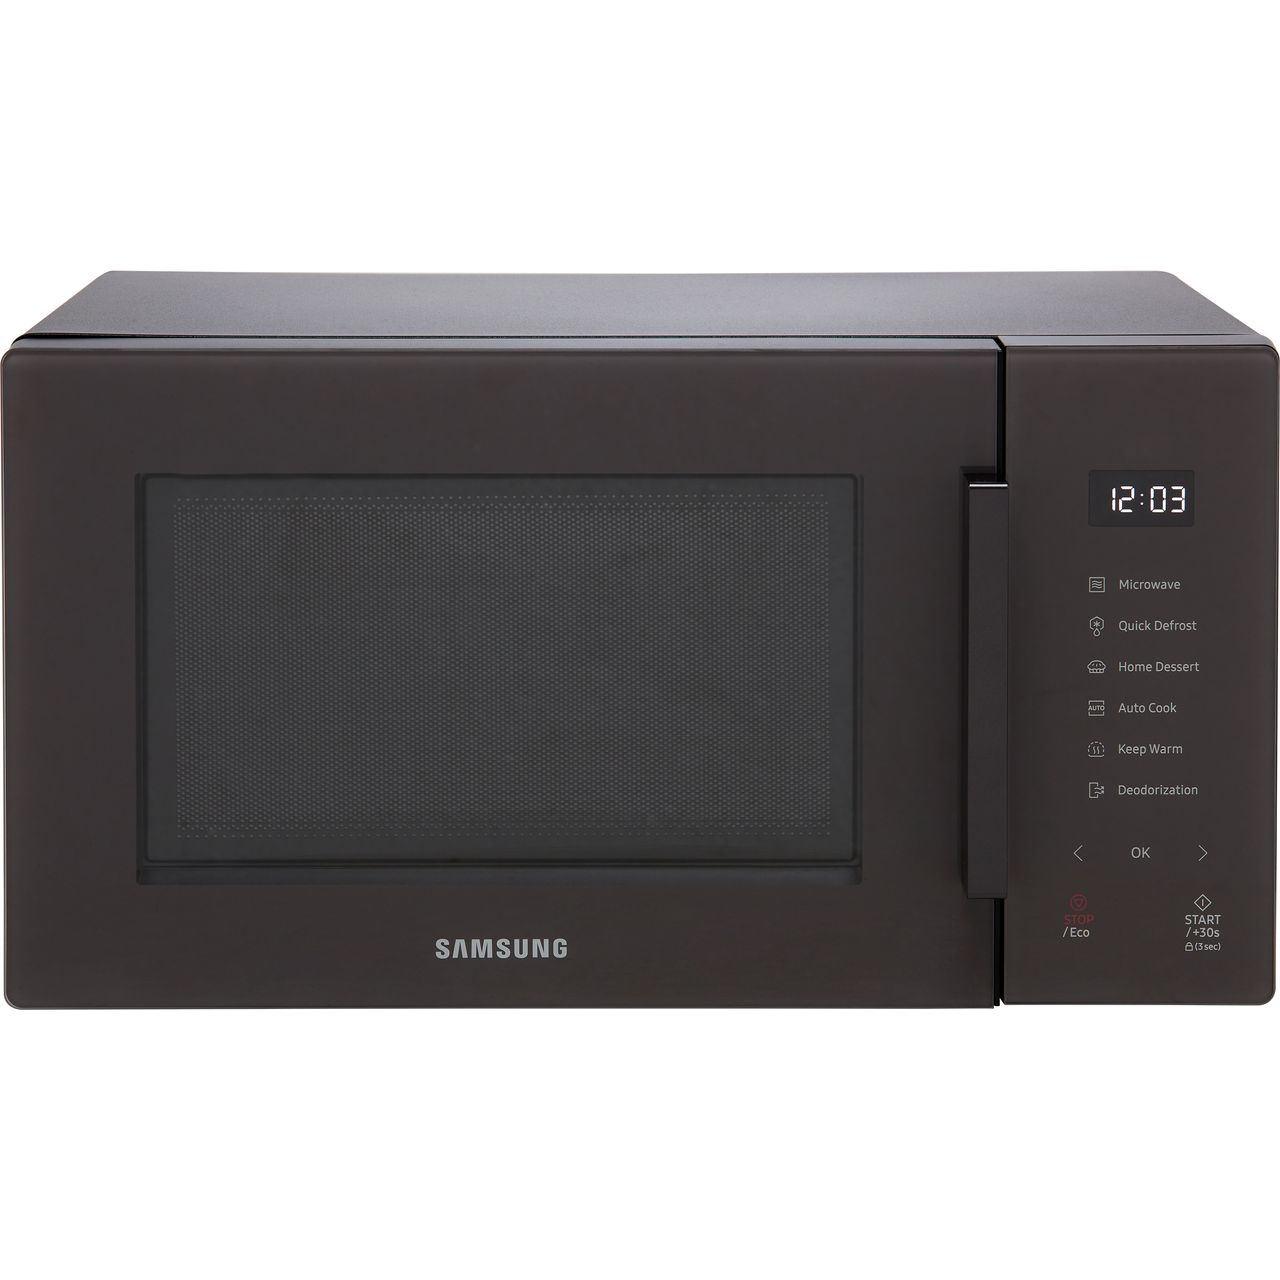 Samsung Mikrowelle Bespoke, Clean Charcoal, 23l, 800W, MS23T5018AC